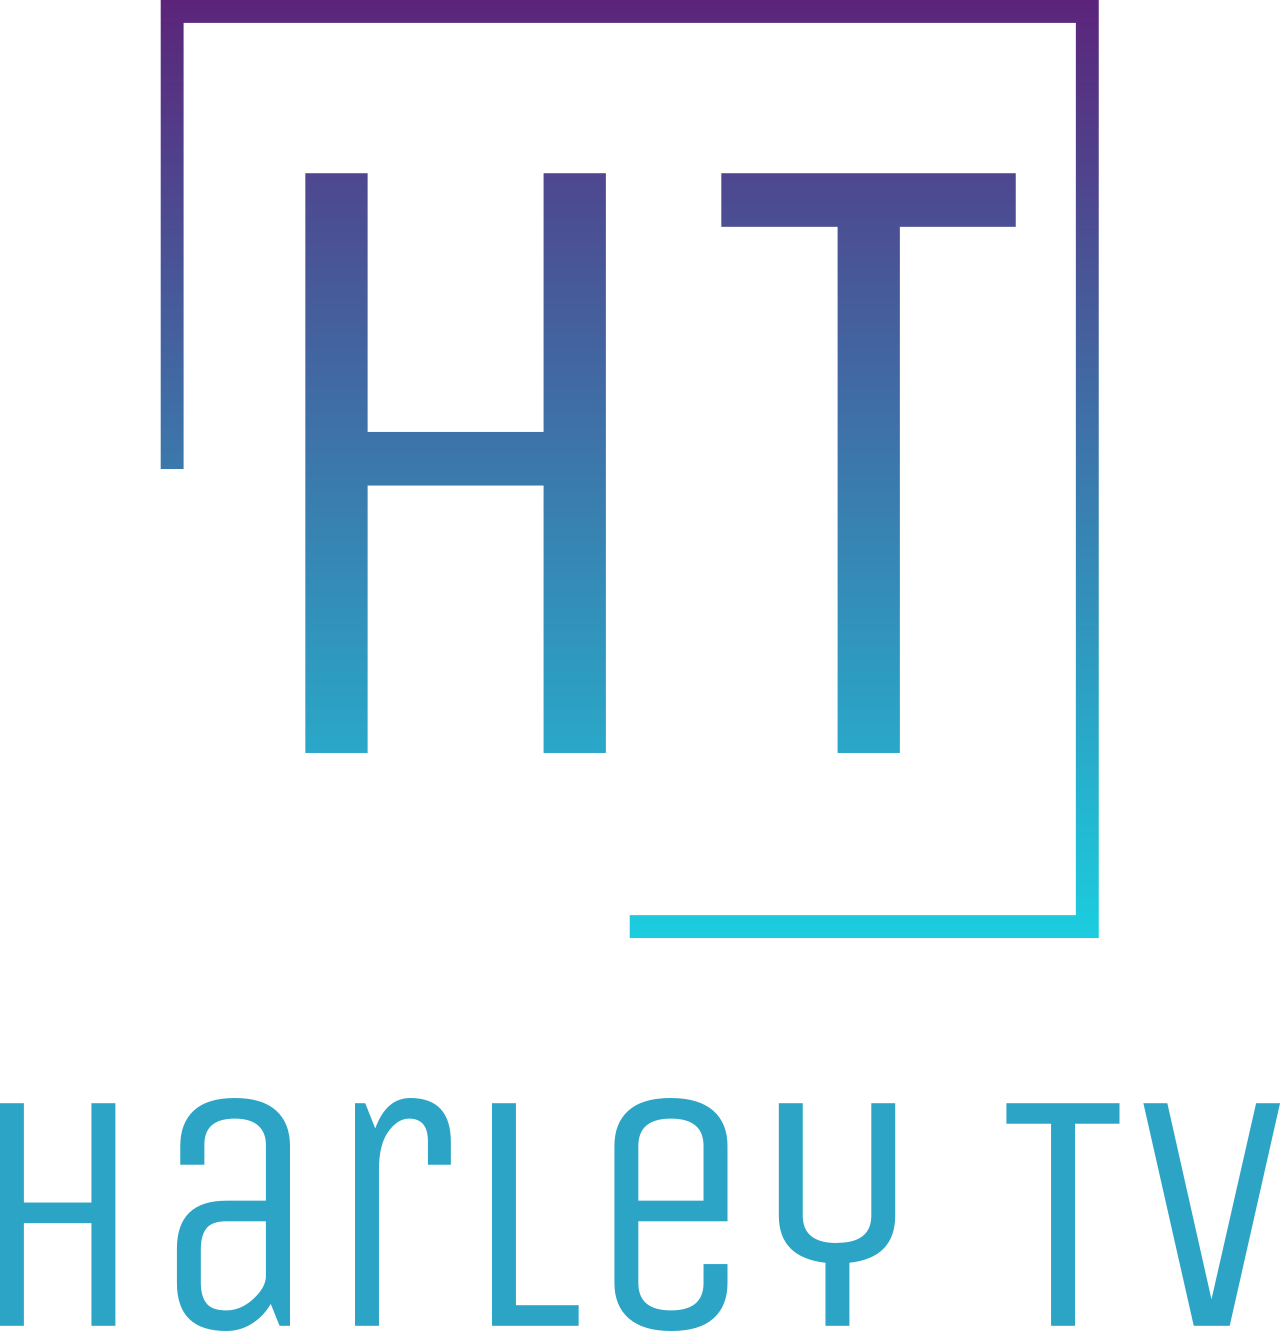 Harley TV's web page